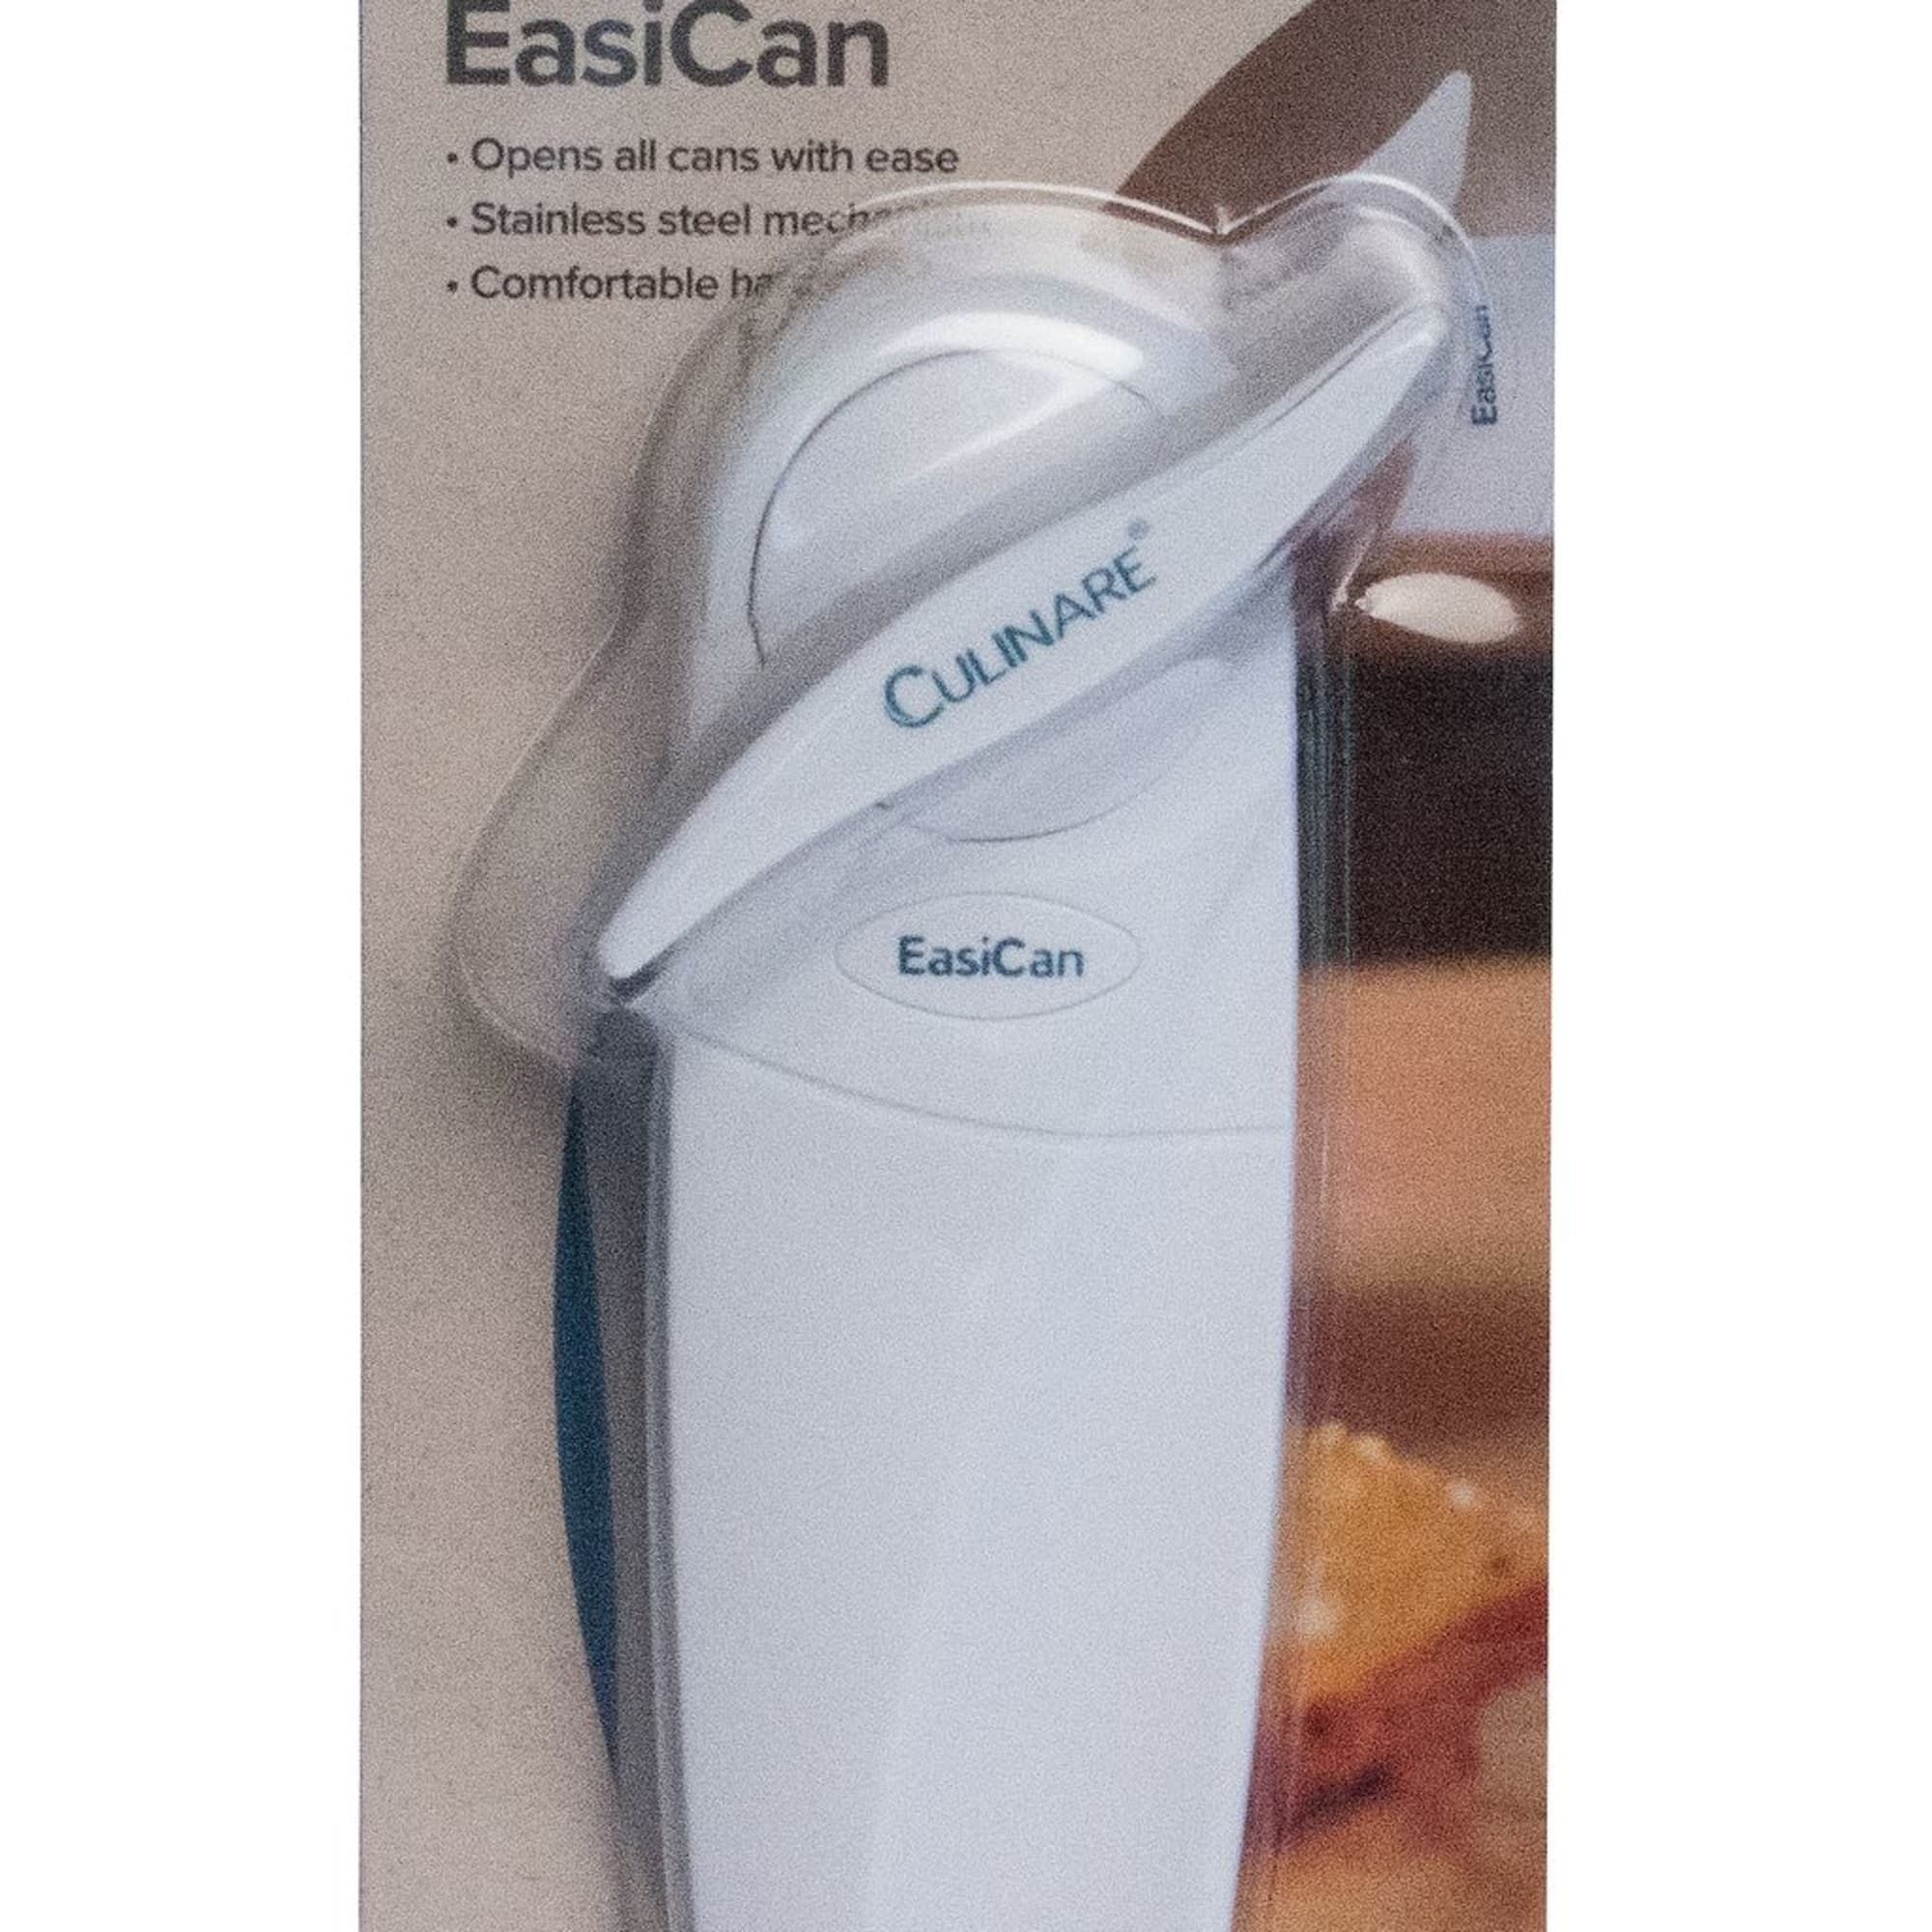 Culinare EasiCan Can Opener Image 2